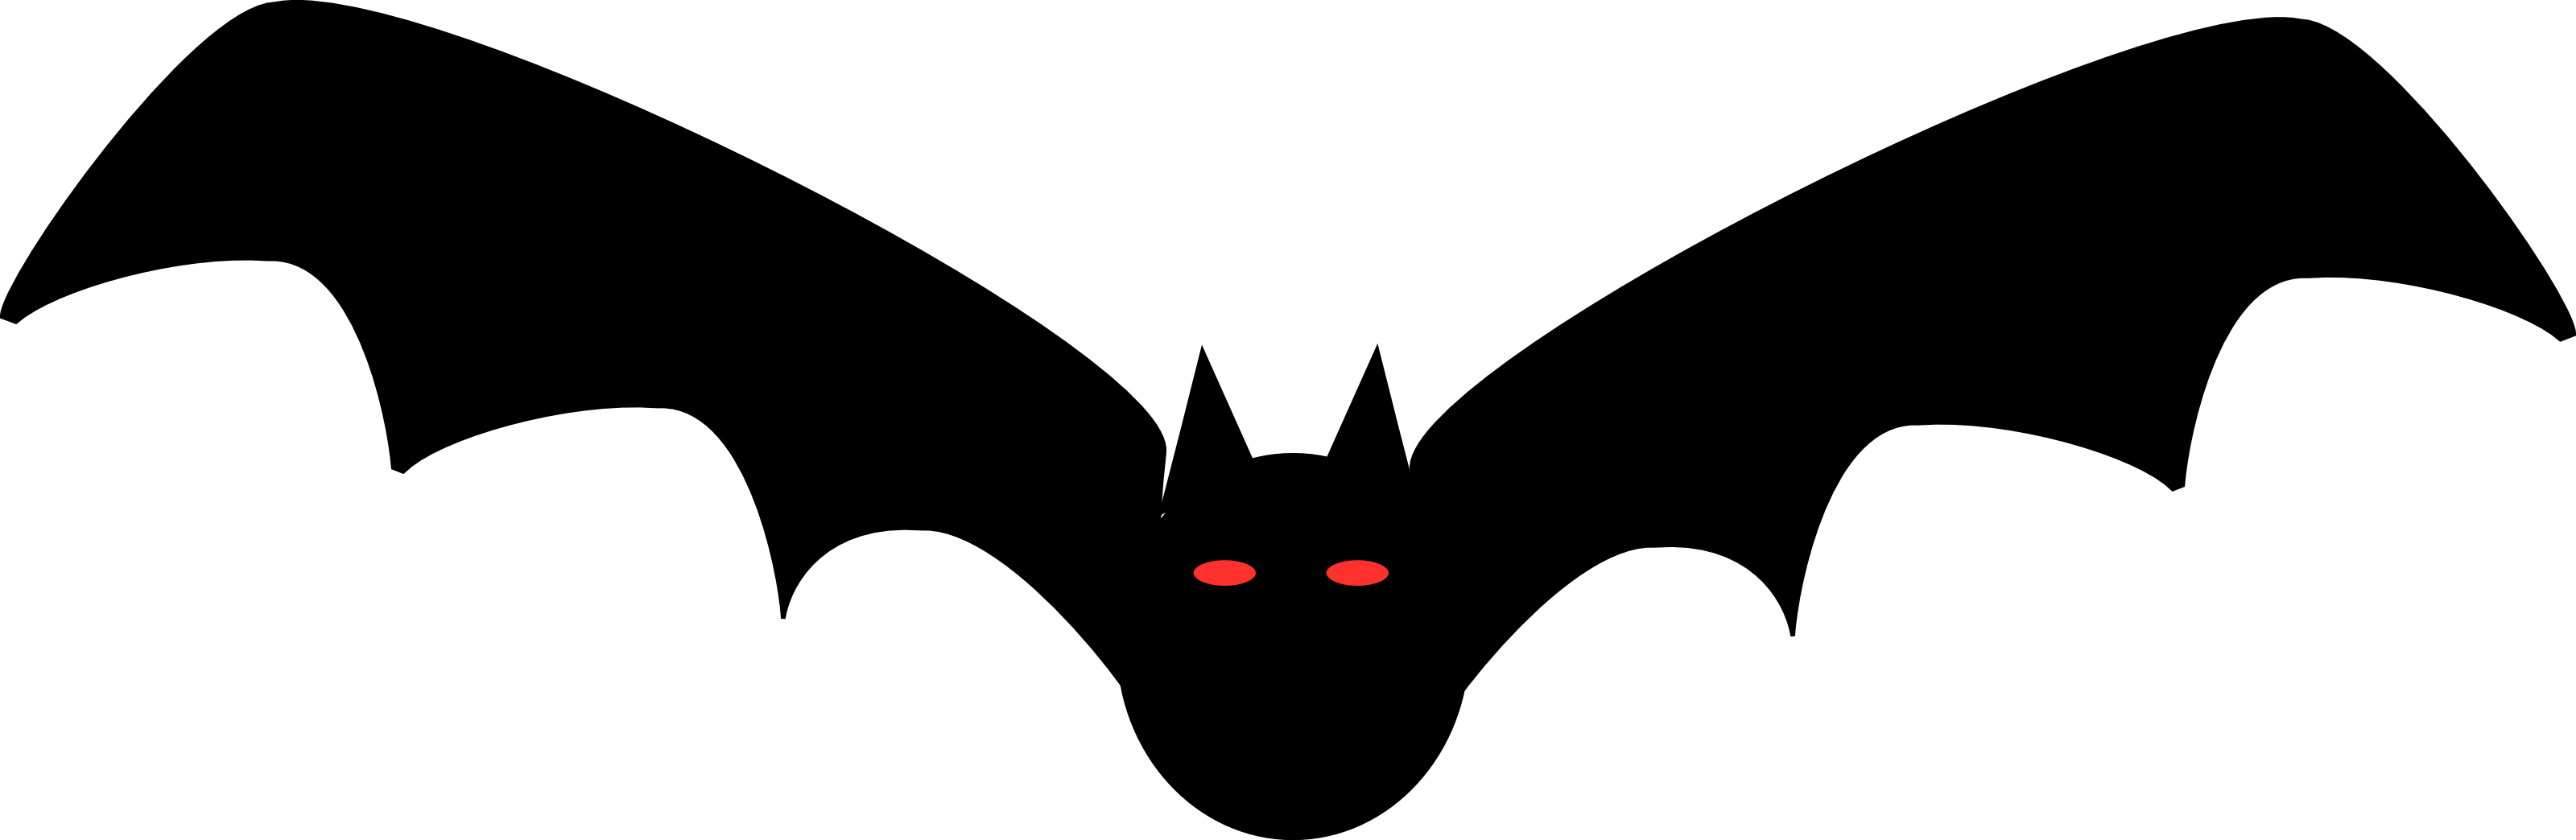 Image - 111-Free-Halloween-Clipart-Illustration-Of-Black-Bat-With ...